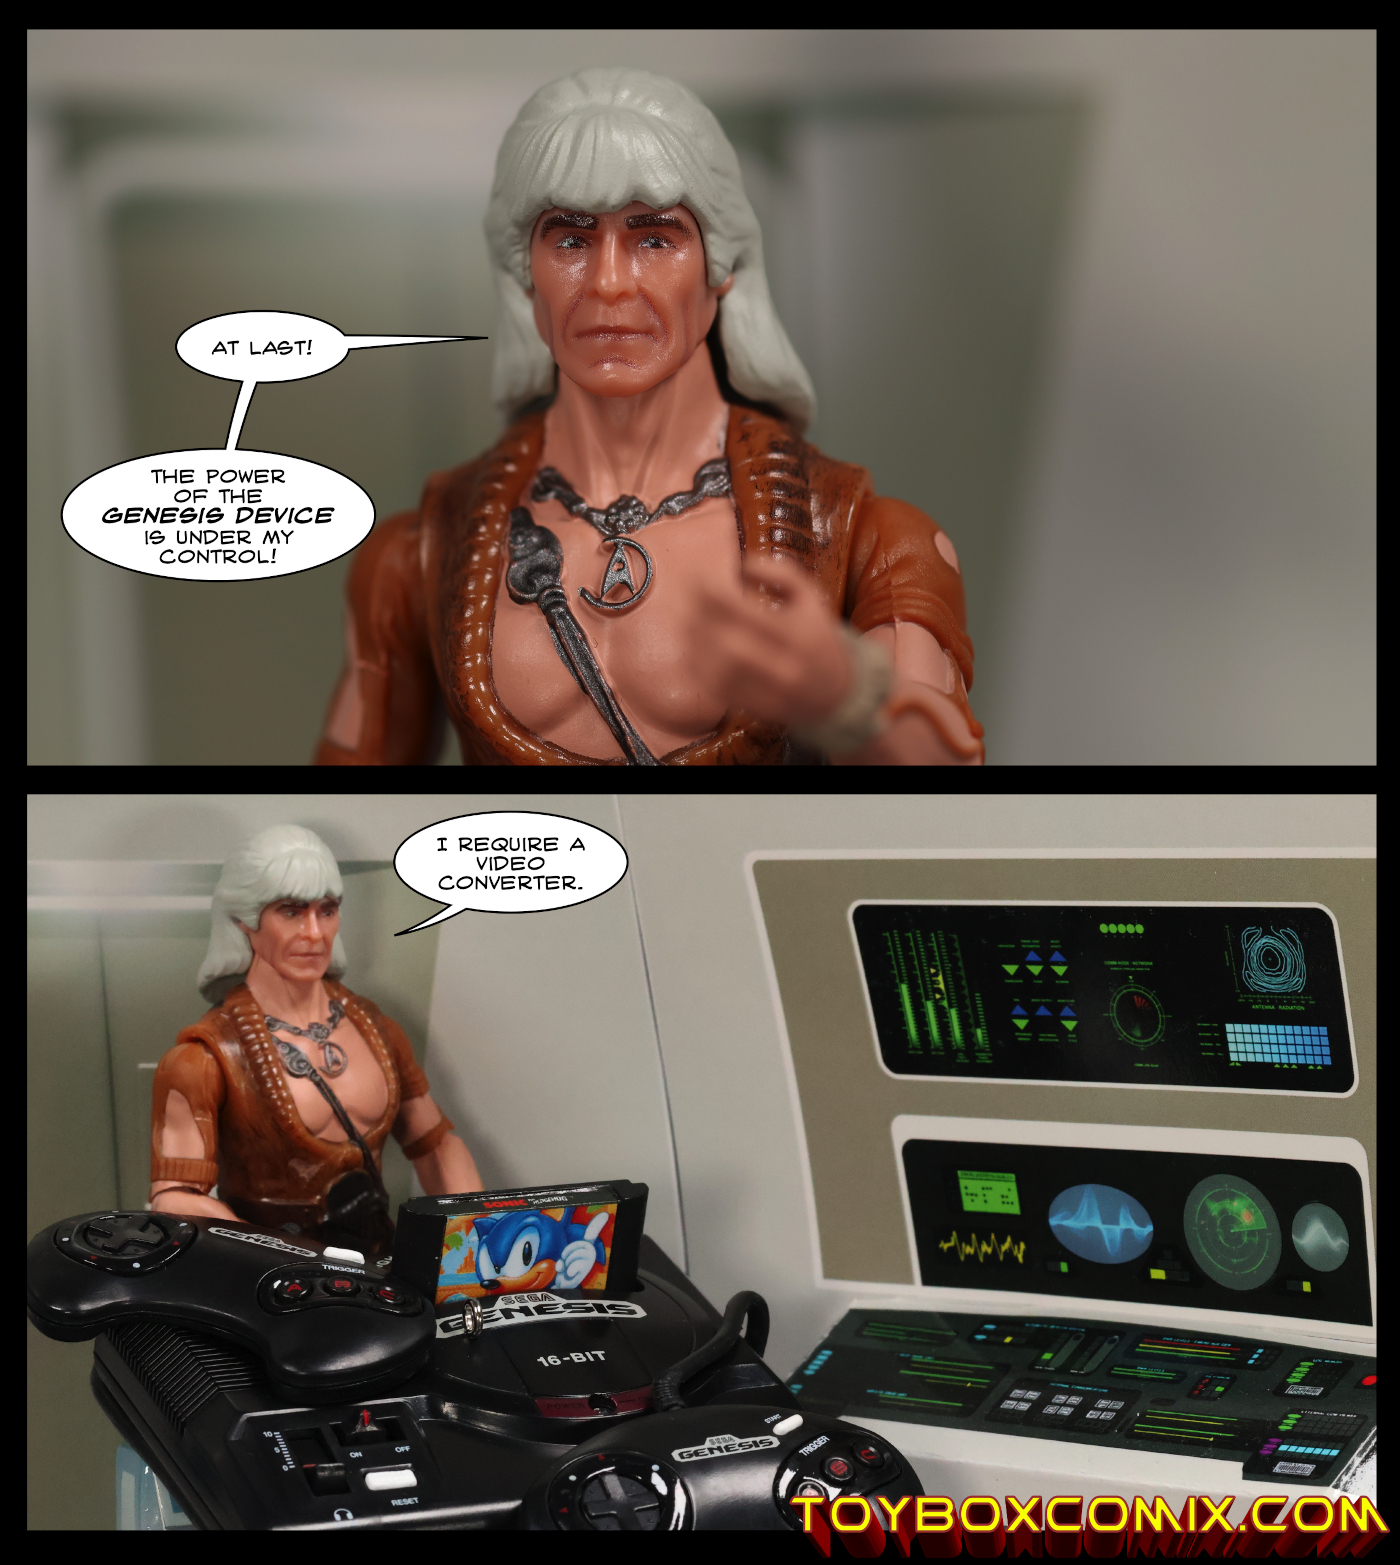 First panel: Khan Noonien-Singh: “At last! The power of the Genesis device is under my control!” Second panel: Khan stands behind a Sega Genesis console next to a bridge console. “I require a video converter.”